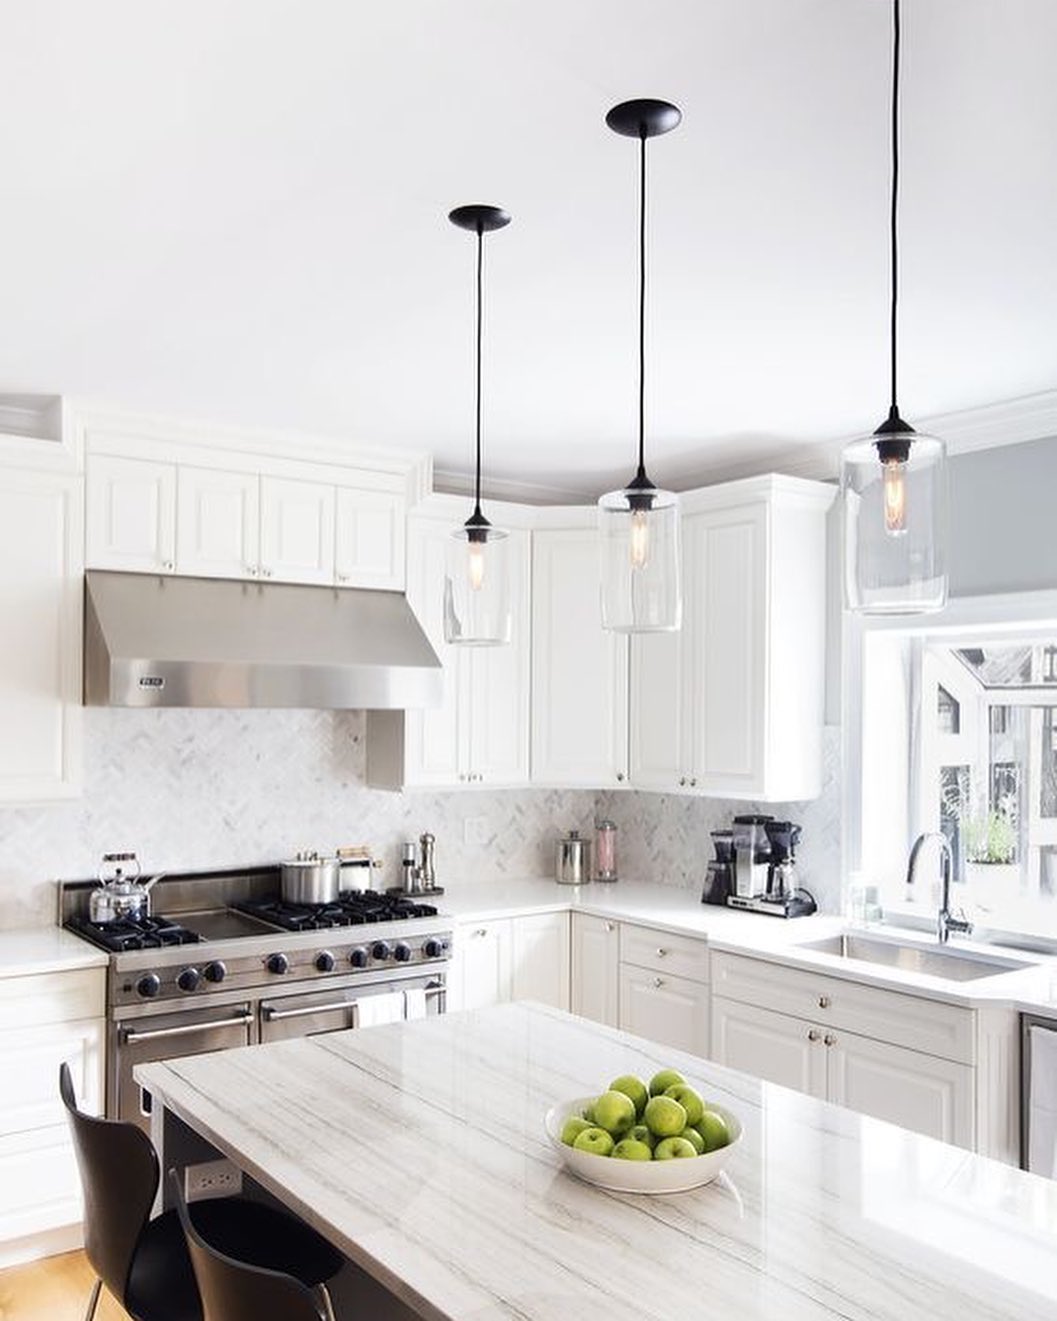 Updated Kitchen with White Cabinets and White Marble Counters. Photo by Instagram user @janeflrealestate